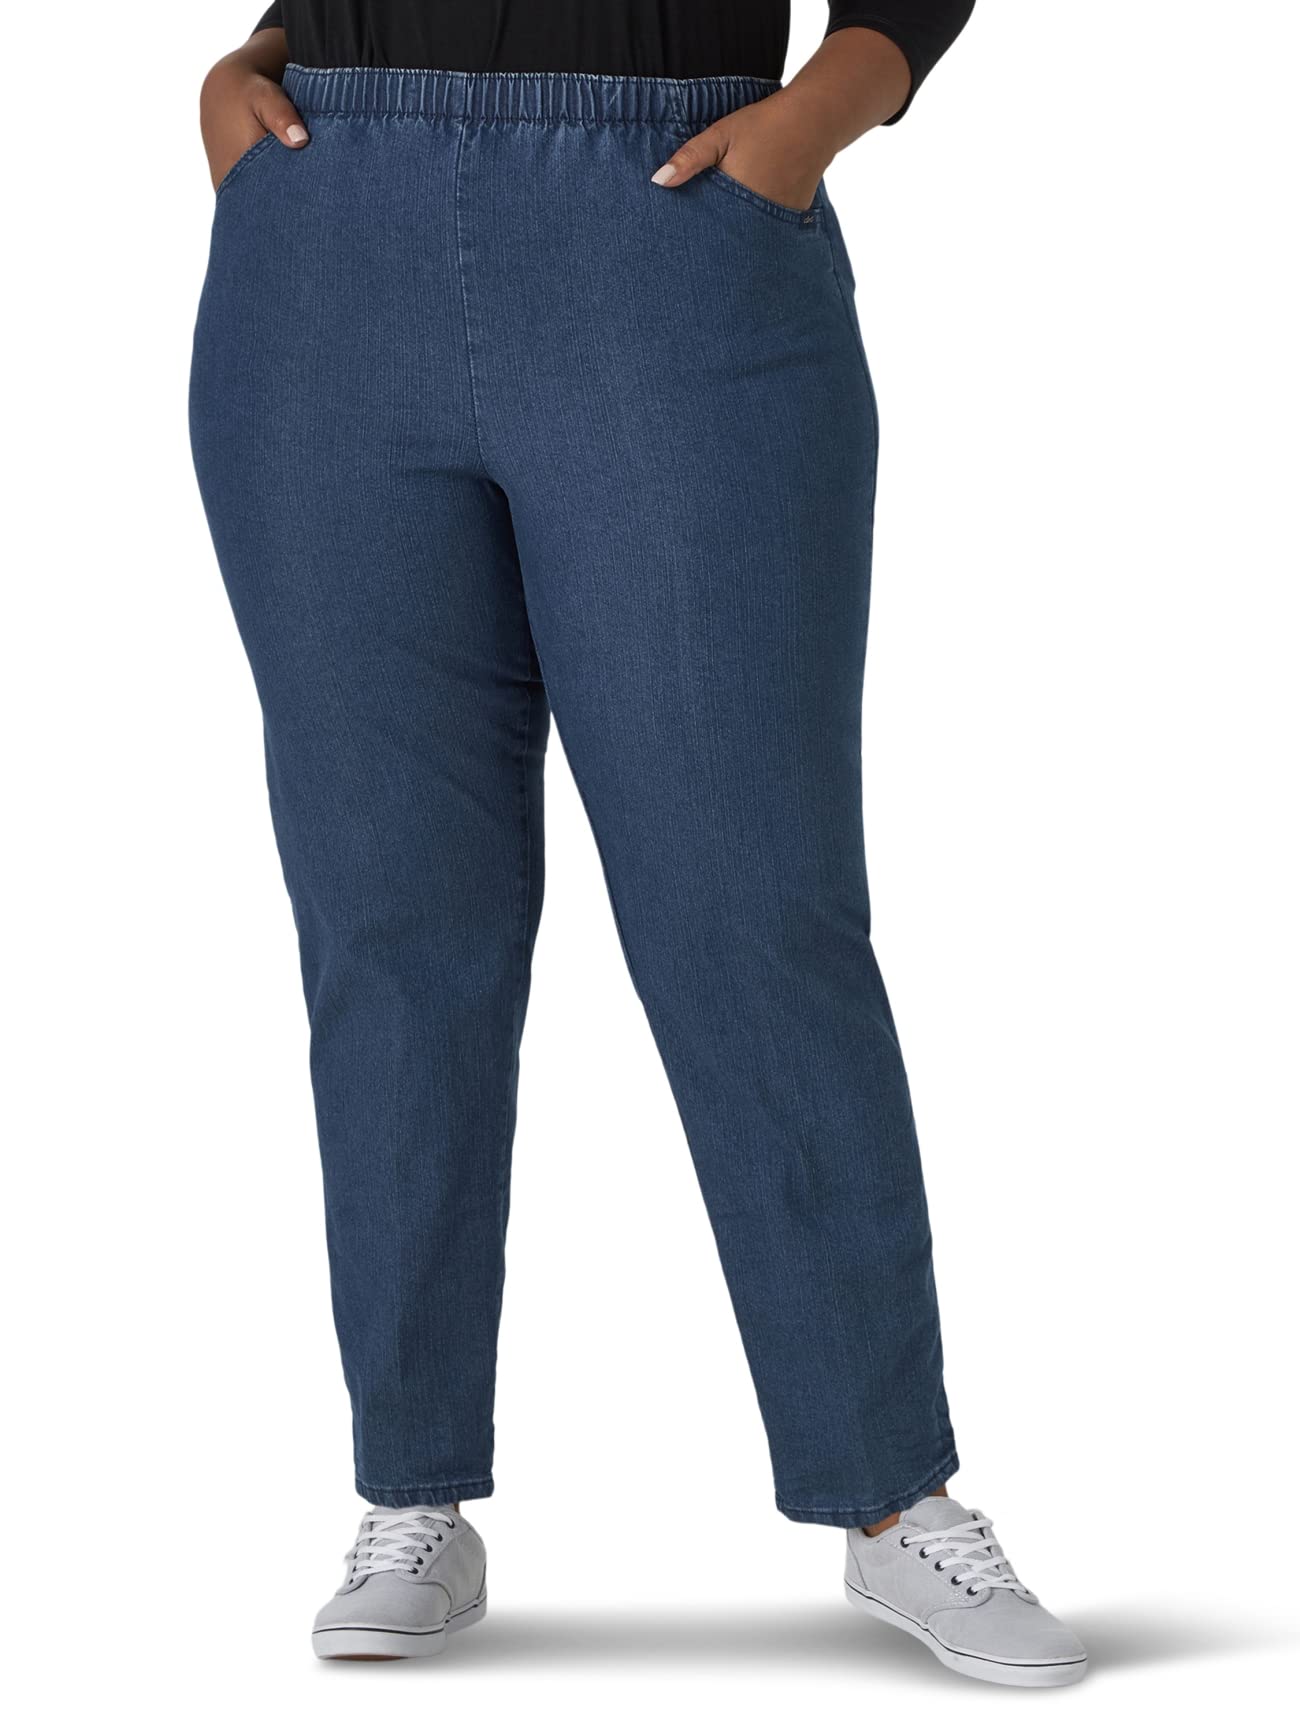 Chic Classic Collection Women's Plus Size Stretch Elastic Waist Pull-on Pant